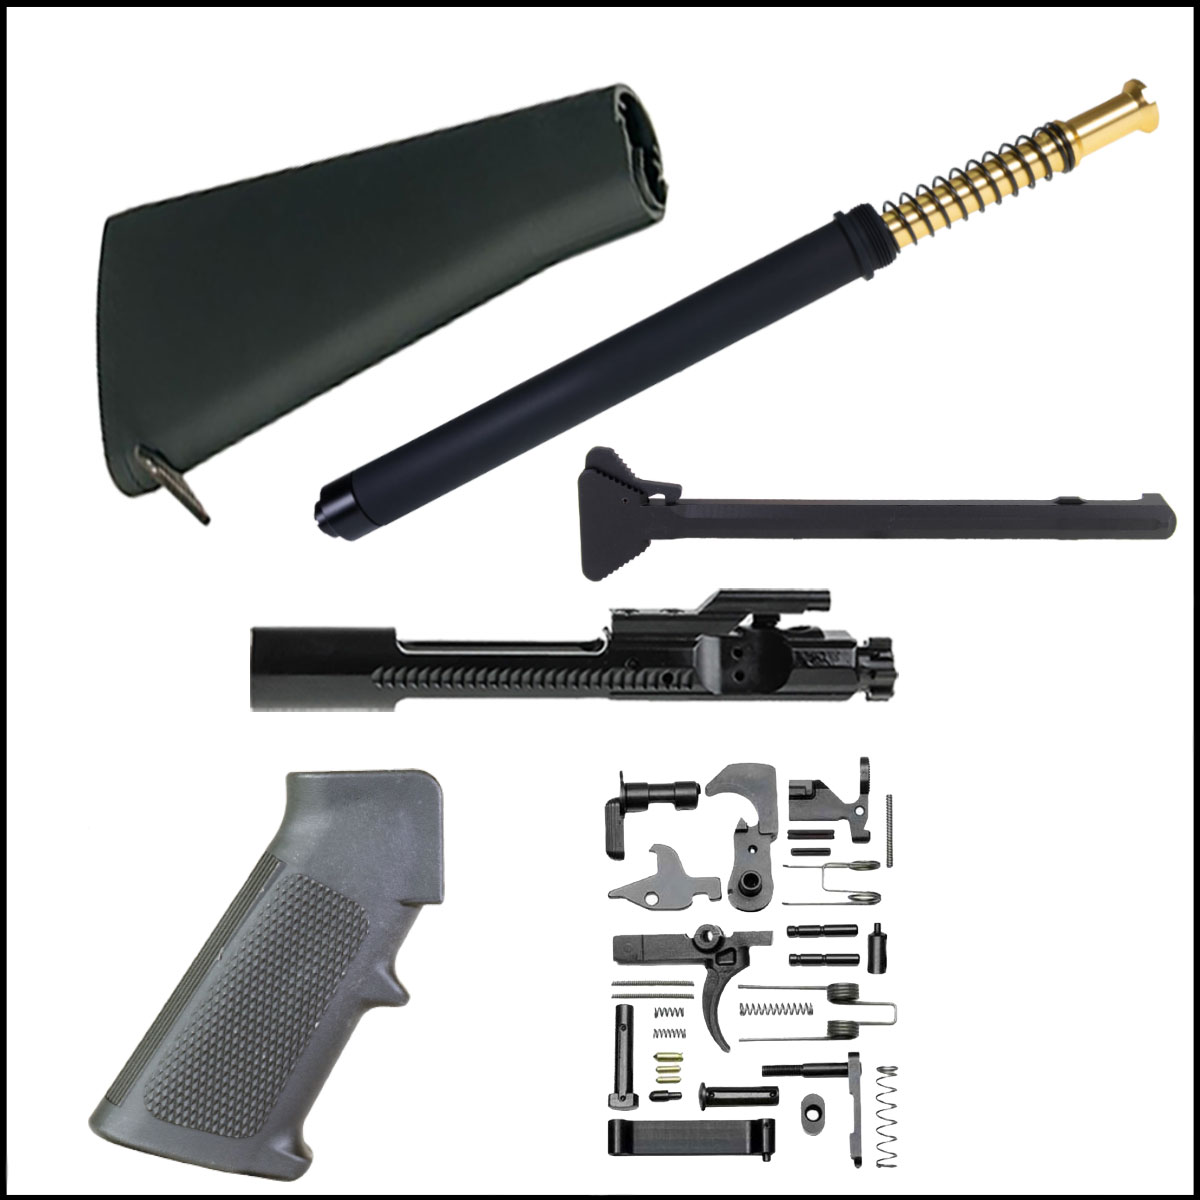 Finish Your Build Kit: Omega Mfg. A2 Style AR Fixed Stock + JE Machine A2 Rifle Buffer Kit  + Recoil Technologies AR-15 Lower Parts Kit w/ Omega Mfg. A2 Pistol Grip + Luth-AR A1 Retro Charging Handle + Recoil Tech. 5.56 Bolt Carrier Group